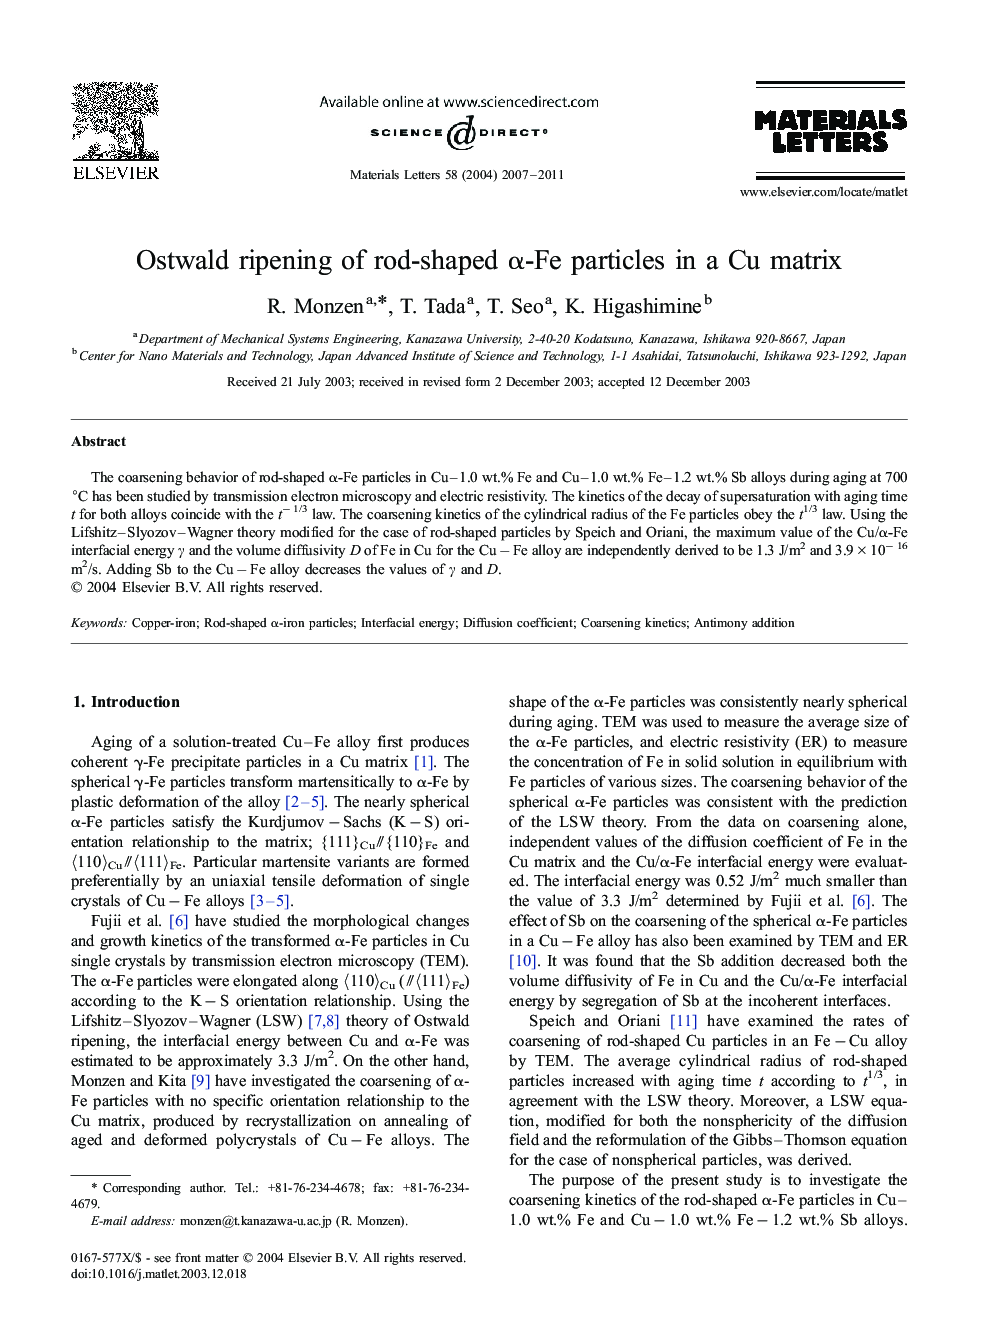 Ostwald ripening of rod-shaped α-Fe particles in a Cu matrix